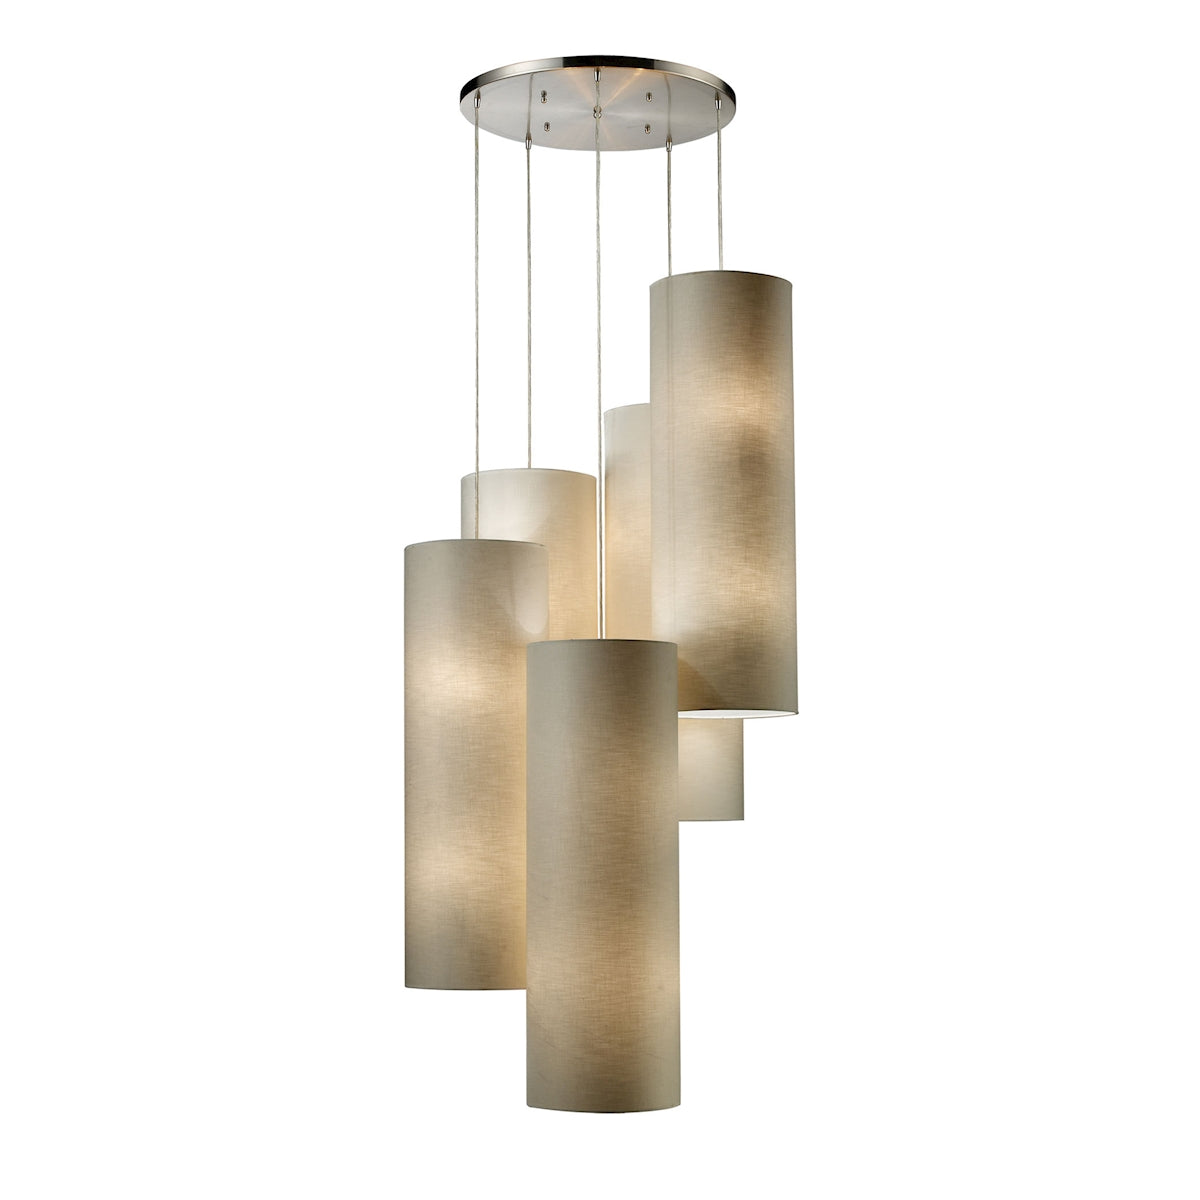 ELK Lighting 20160/20R - Fabric Cylinders 33" Wide 20-Light Chandelier in Satin Nickel with 5 Shades